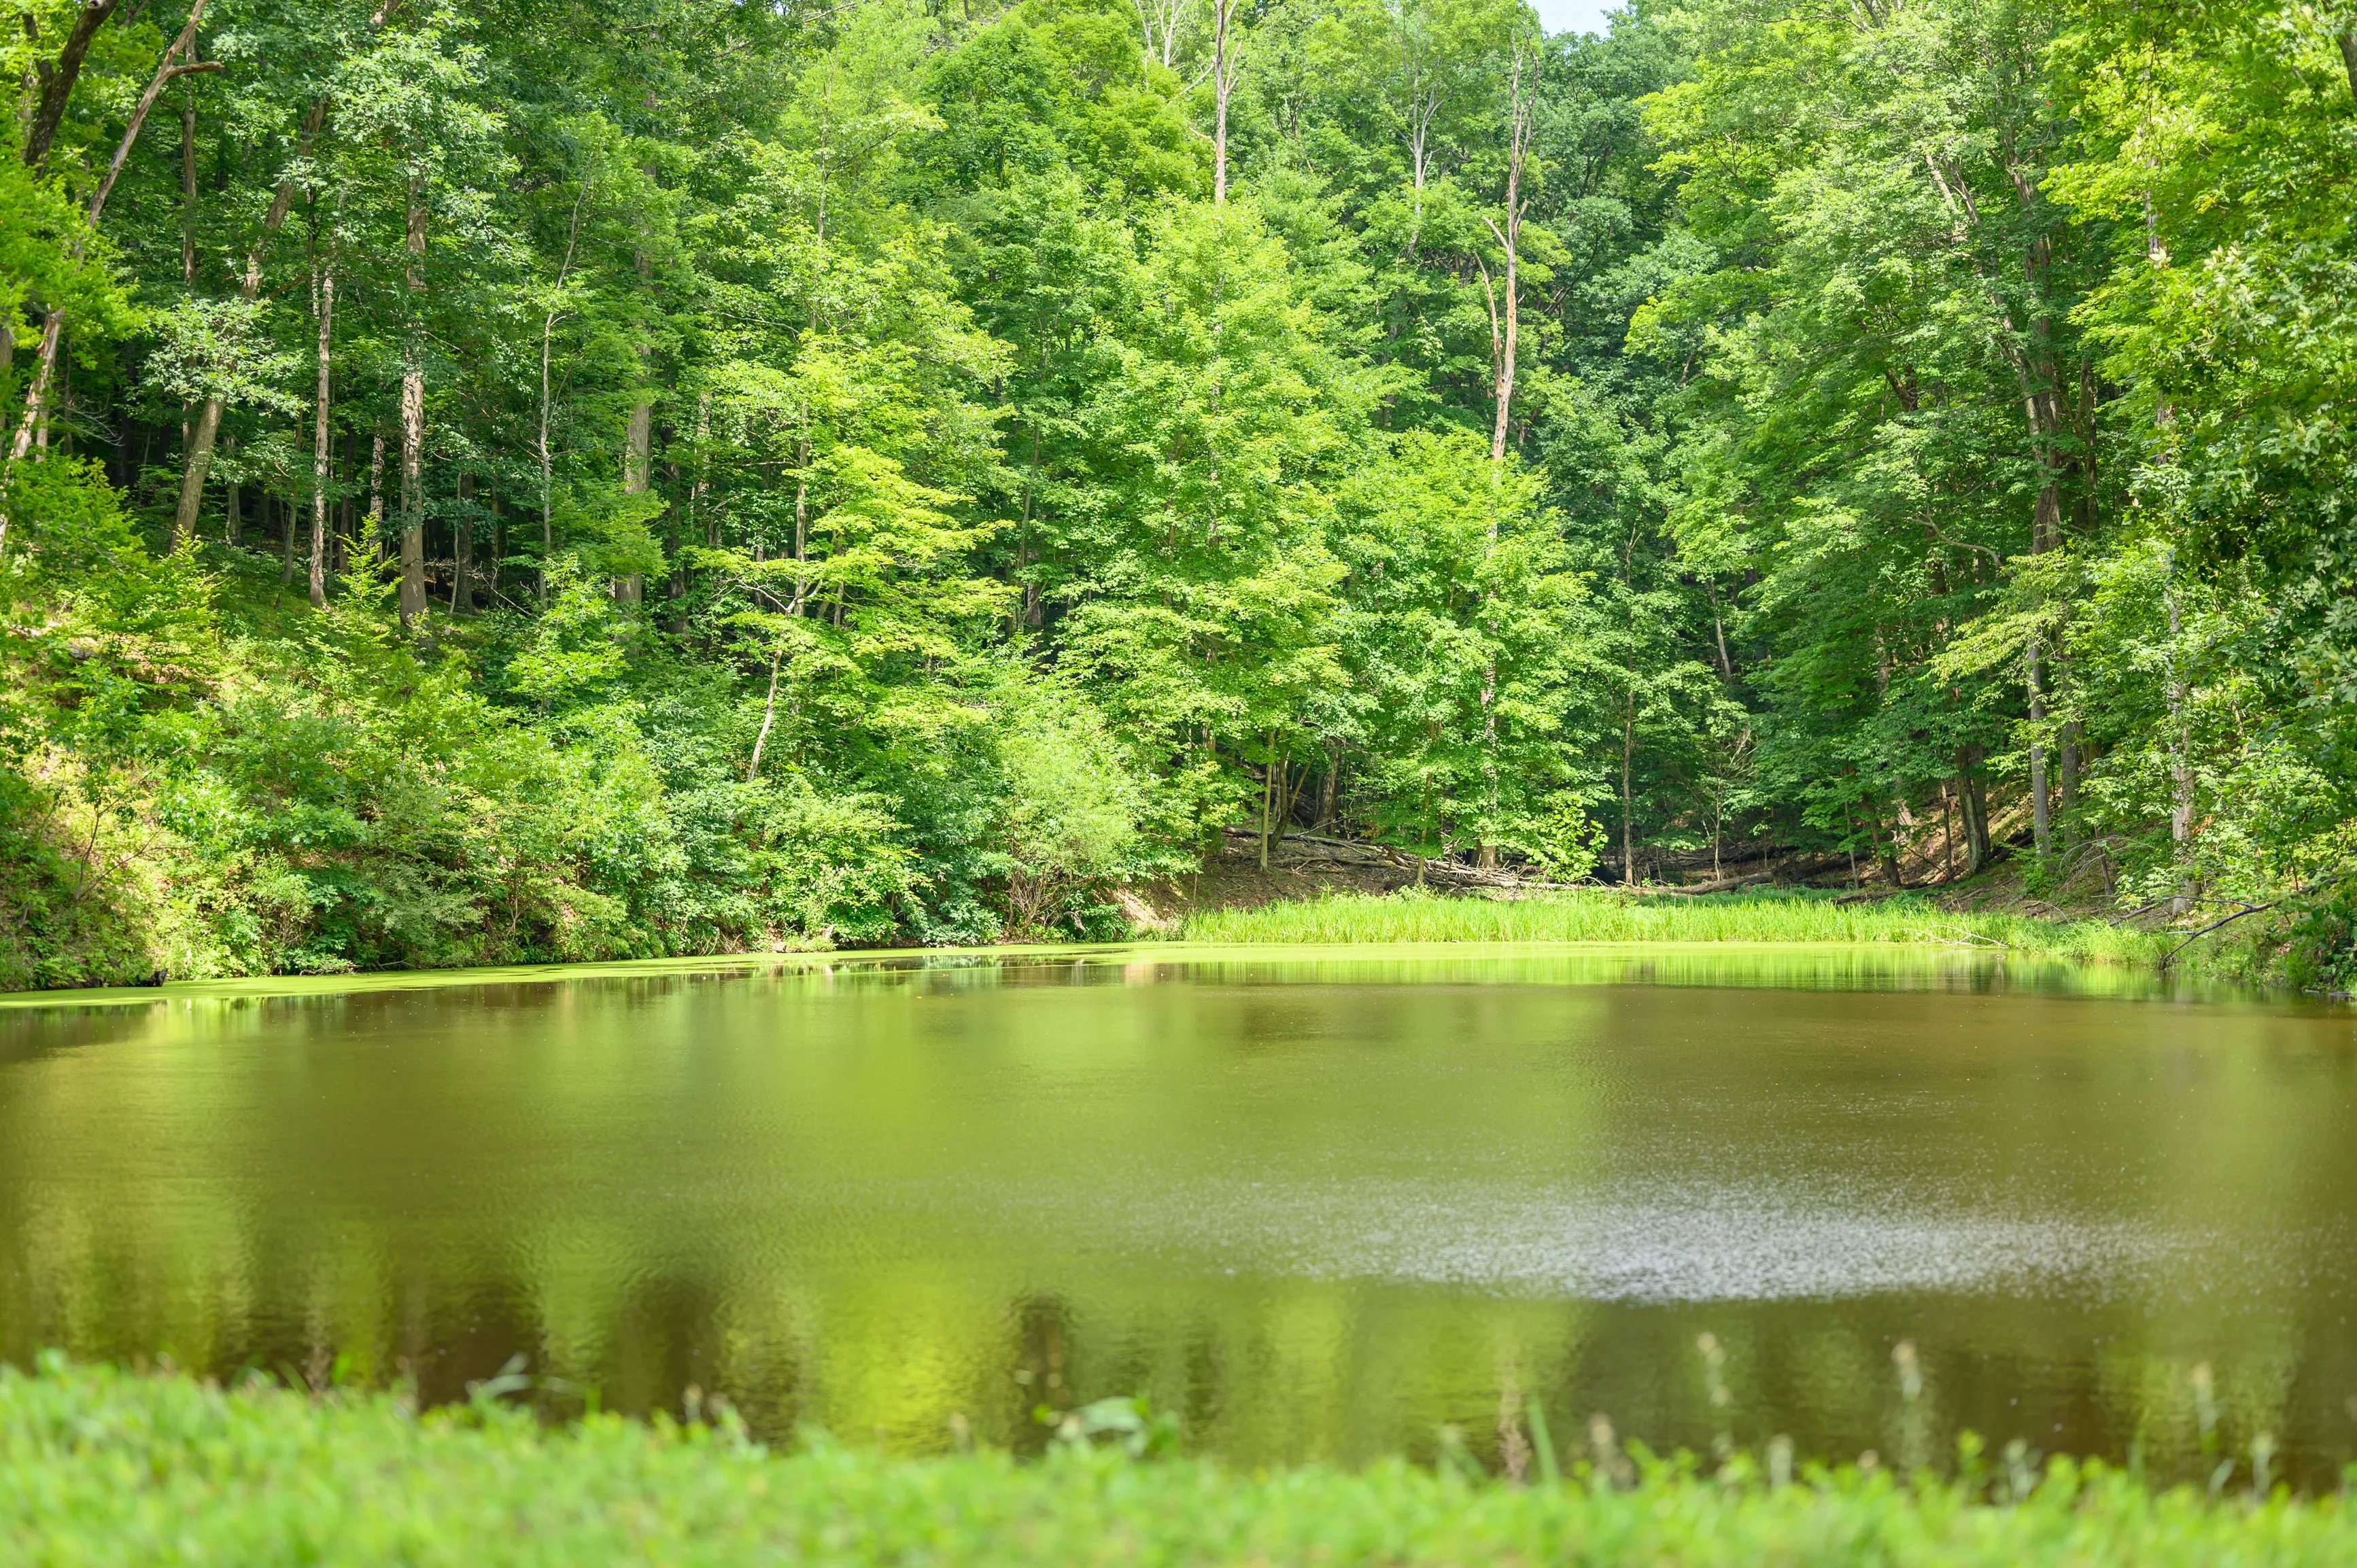 Serene forest pond surrounded by lush green trees on a bright sunny day.